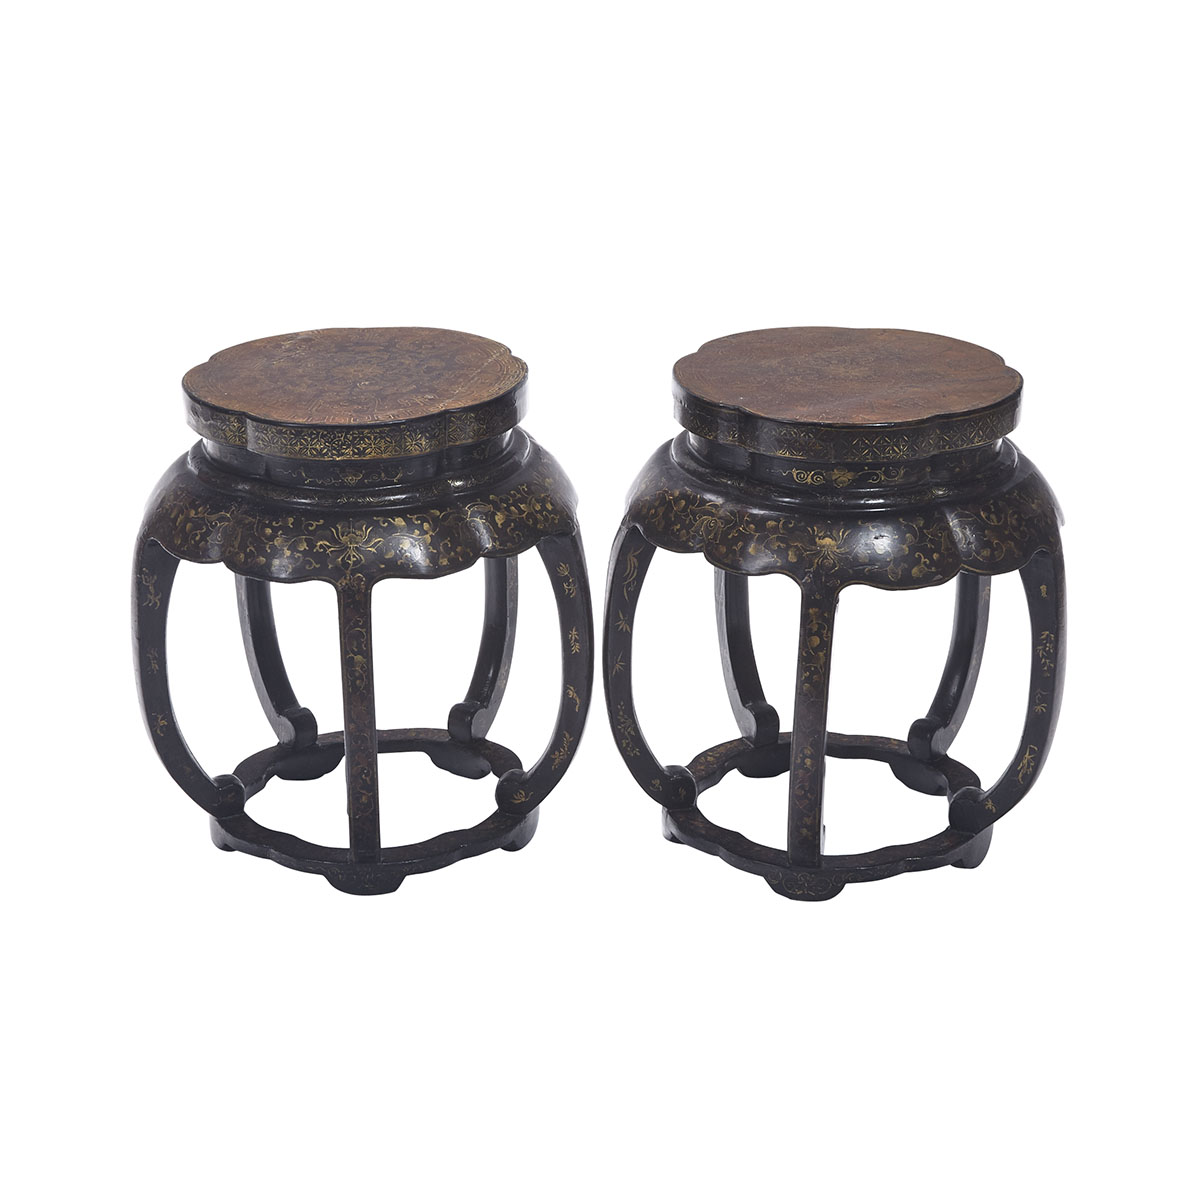 Pair of Gilt Lacquer Drum Stools, 18th/19th Century